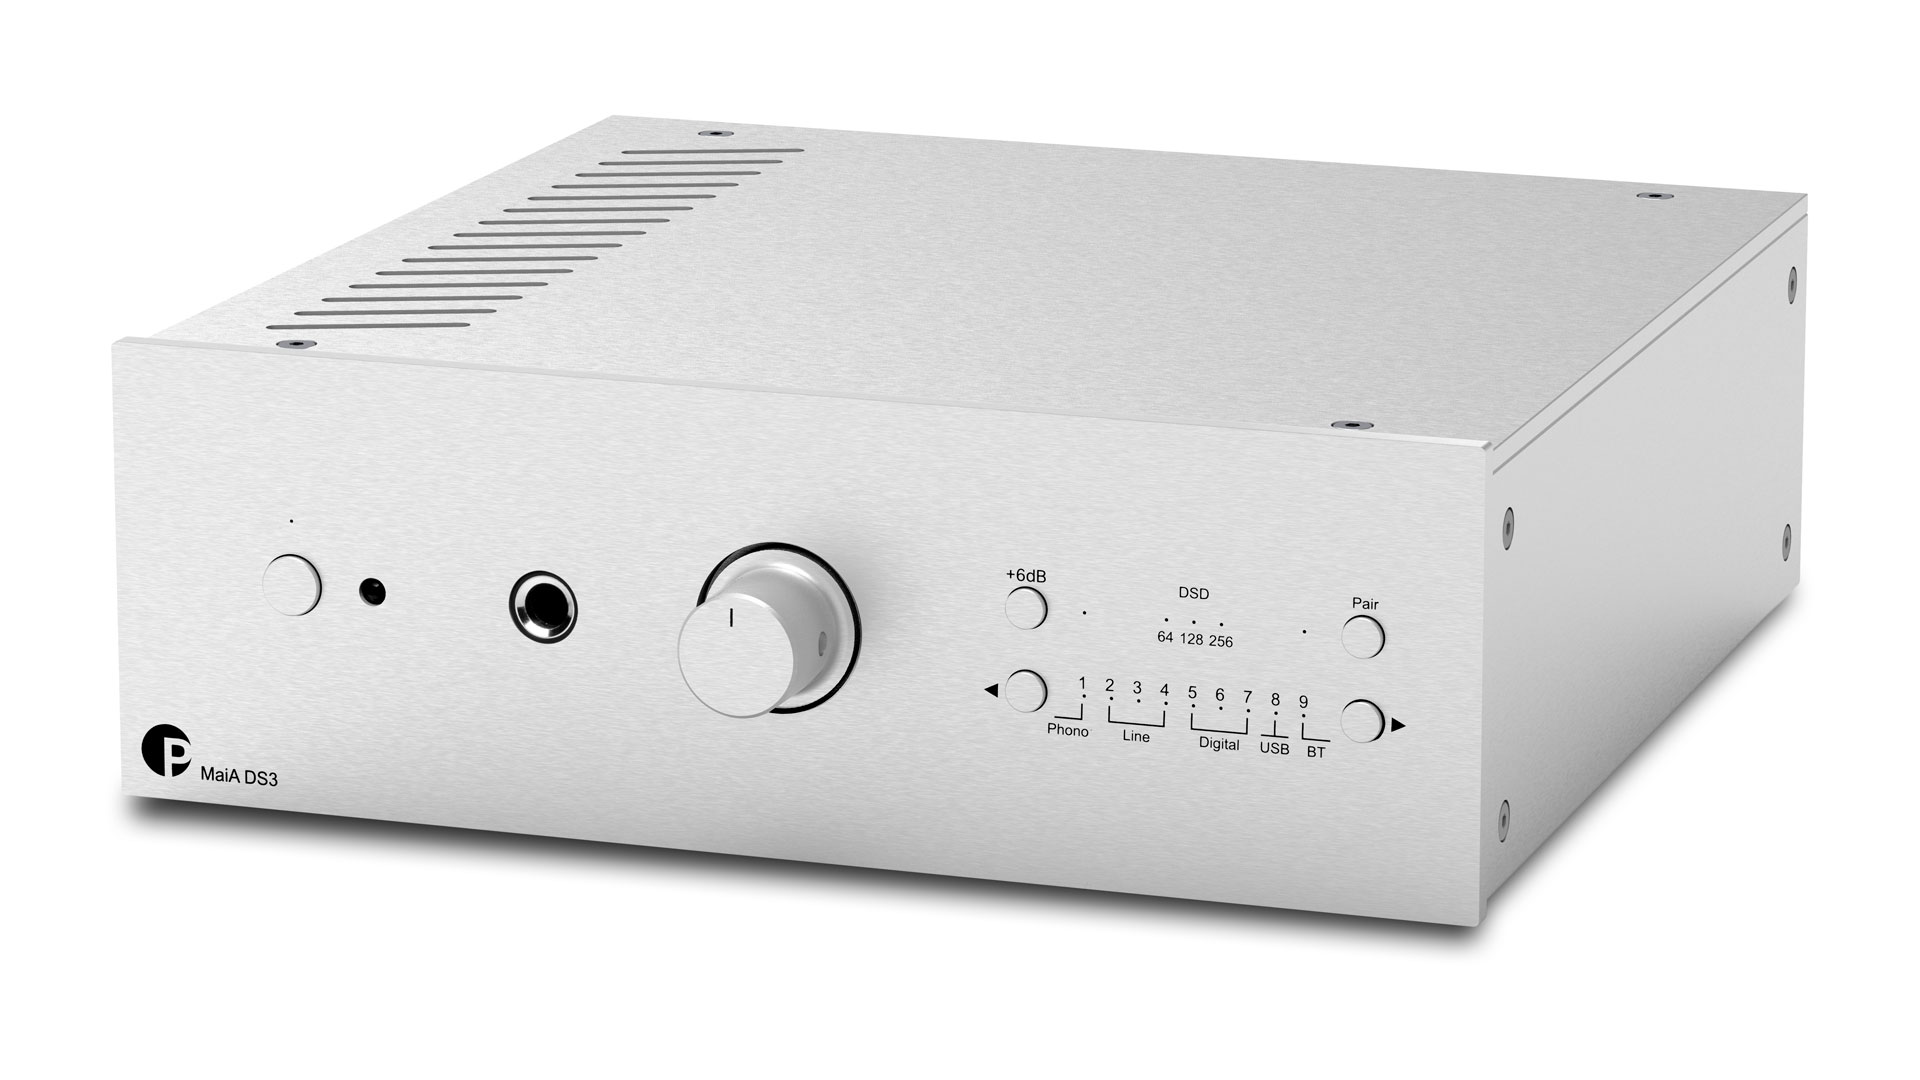 The new integrated amplifier Pro-Ject MaiA DS3 (Image Credit: Pro-Ject)